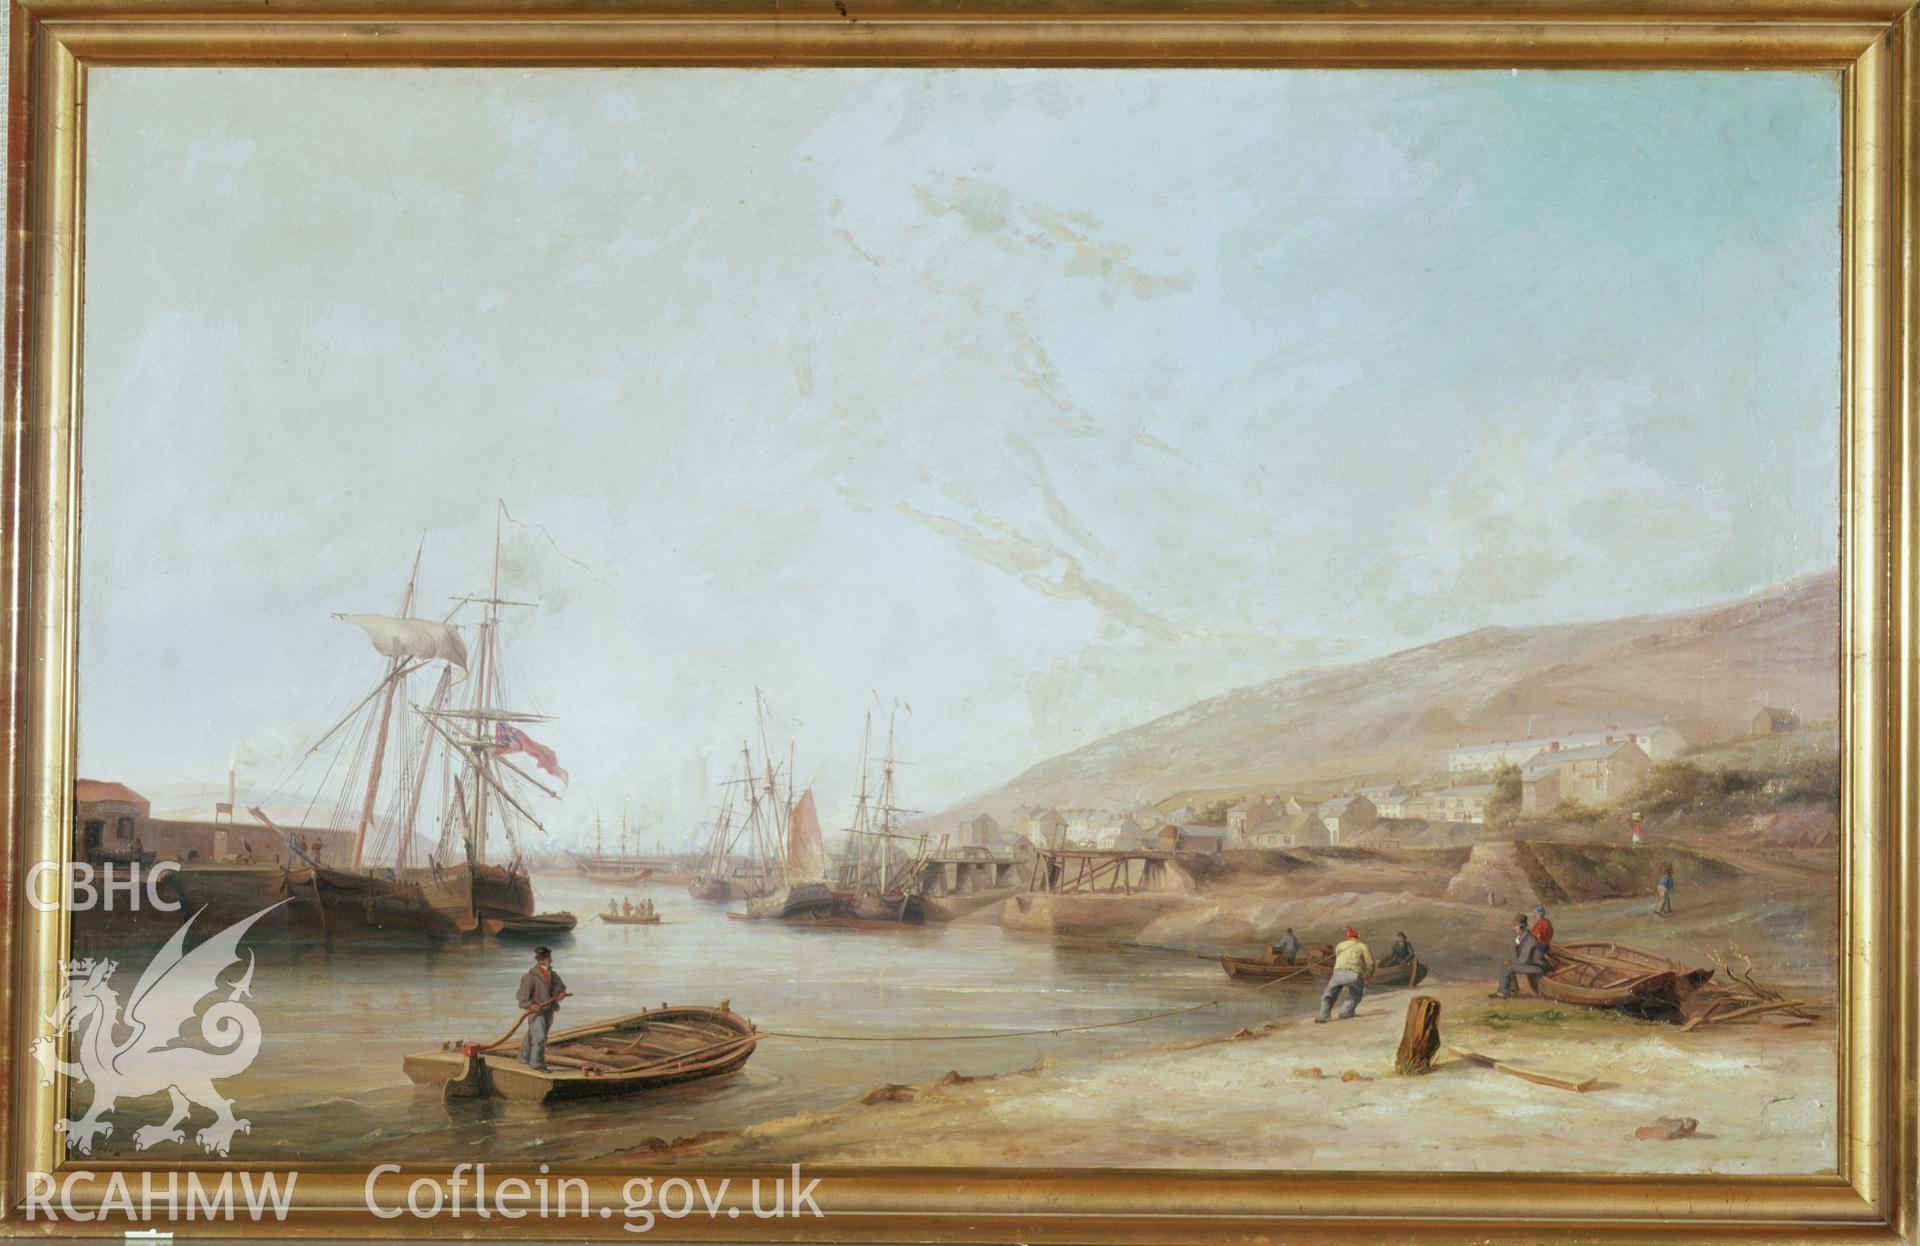 RCAHMW colour transparency of a painting showing tipping staithes at Smith's Canal.